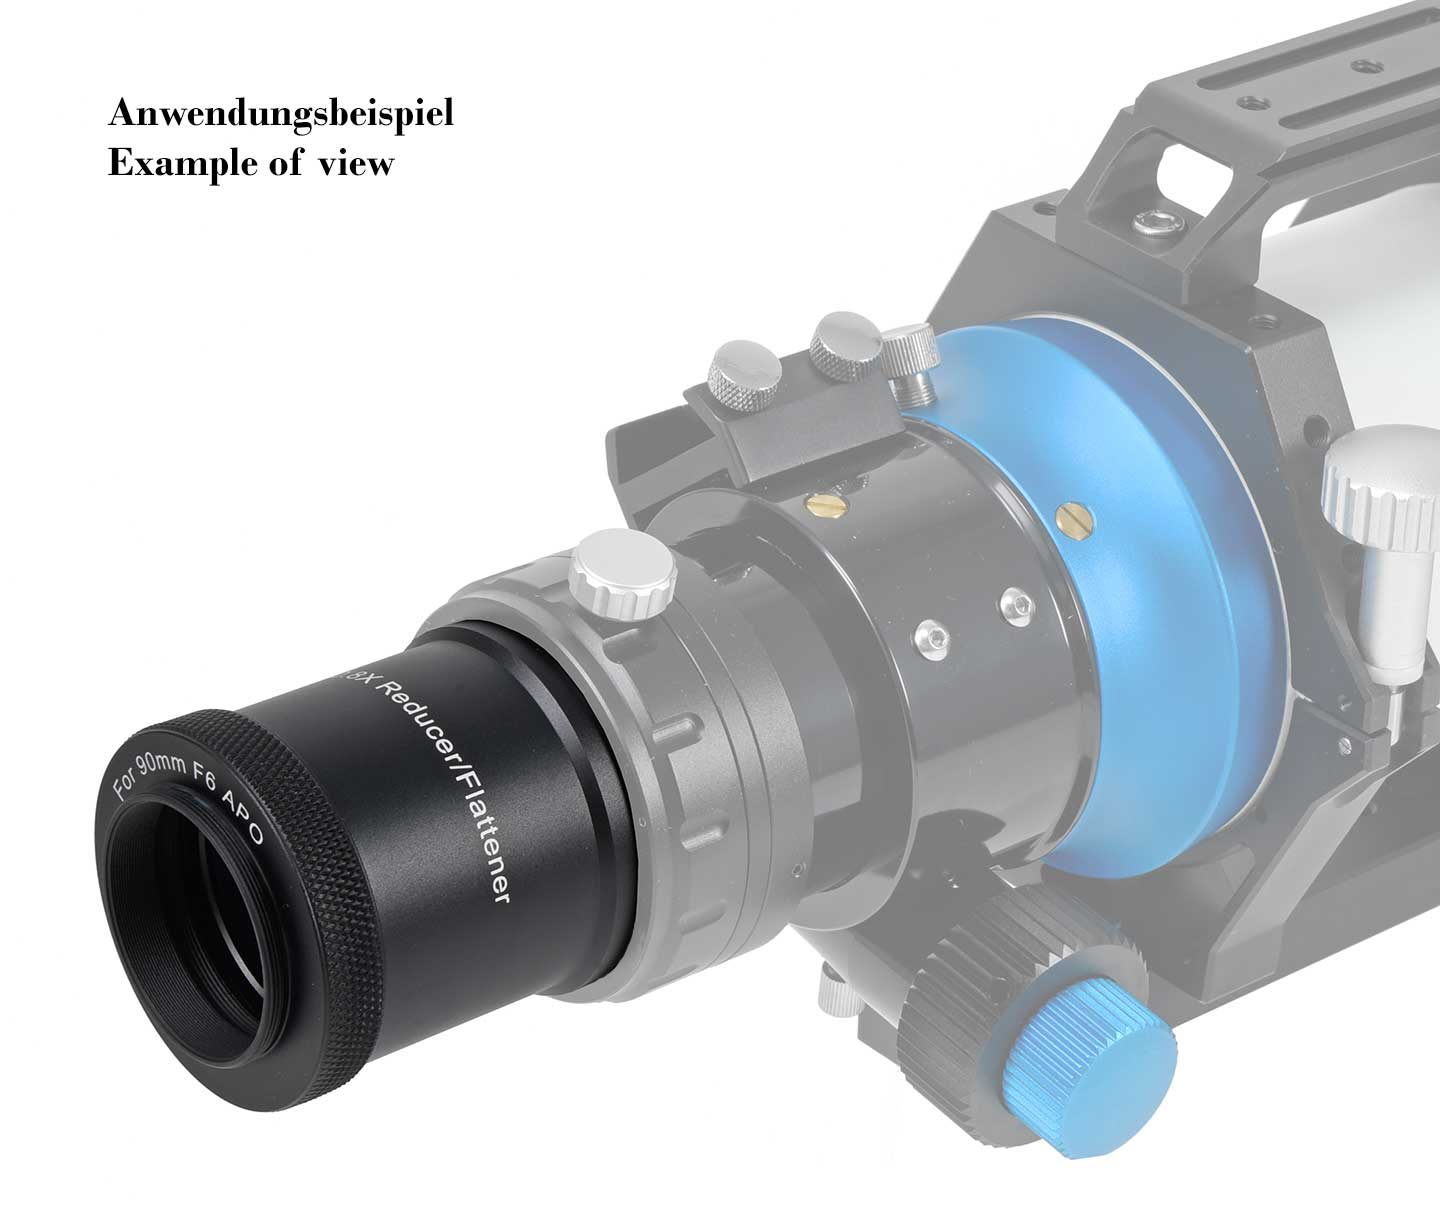  The corrector and focal reducer is designed for the TSCFAPO90 and allows astrophotography through this telescope. [EN] 